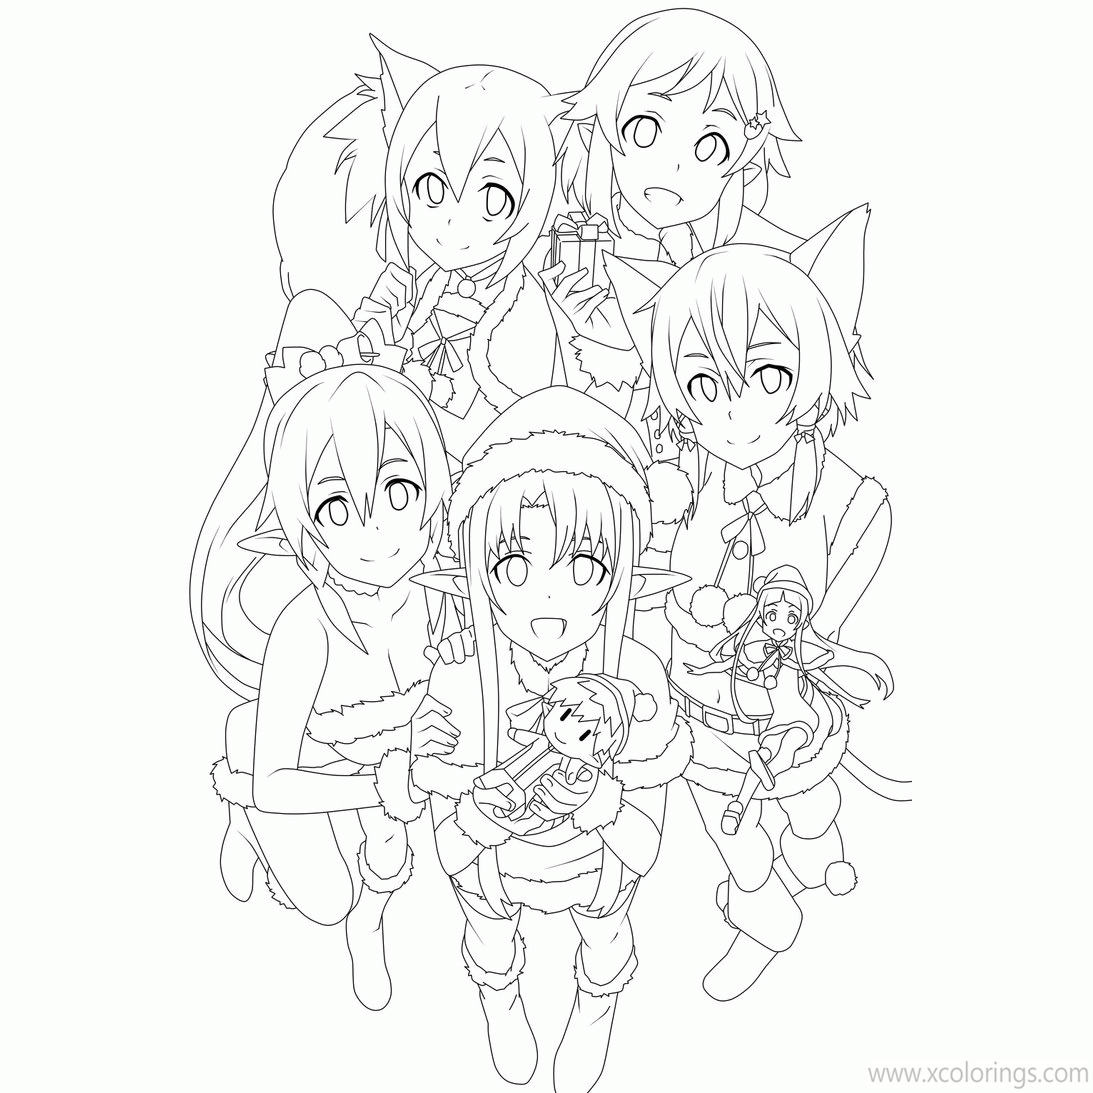 Free Girls from Sword Art Online Coloring Pages printable